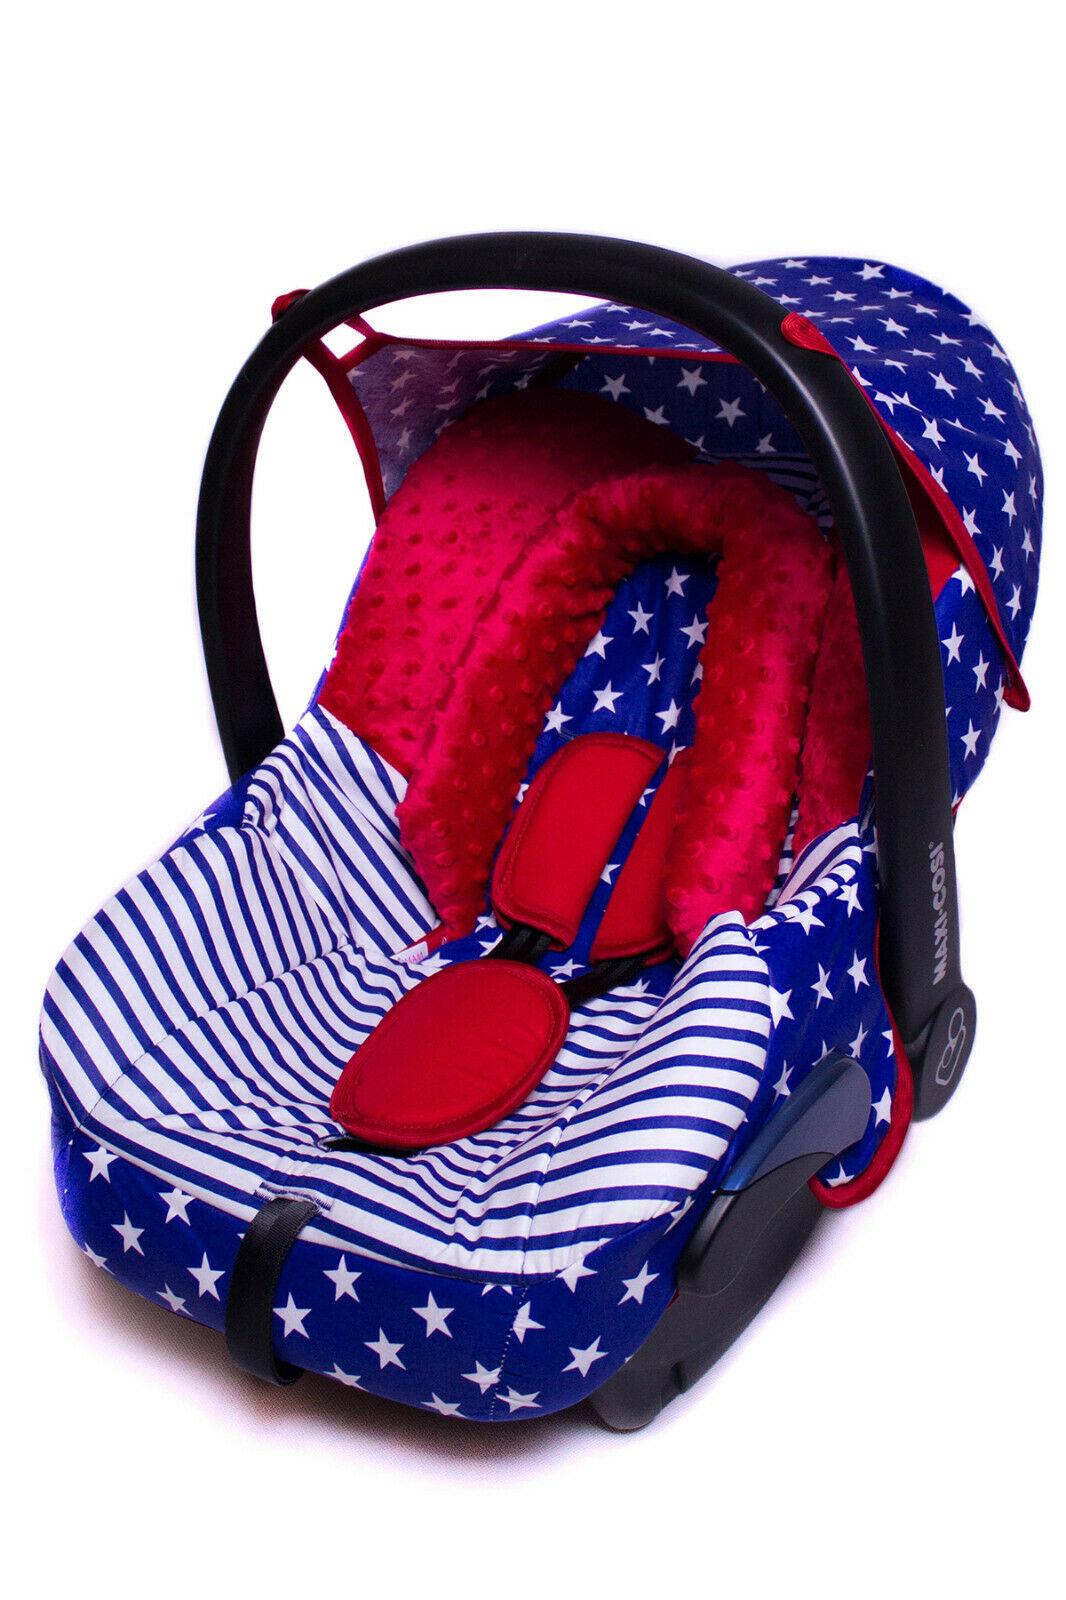 Full Cover Set Fitting Maxi Cosi Cabriofix Baby Car Seat - Navy Red